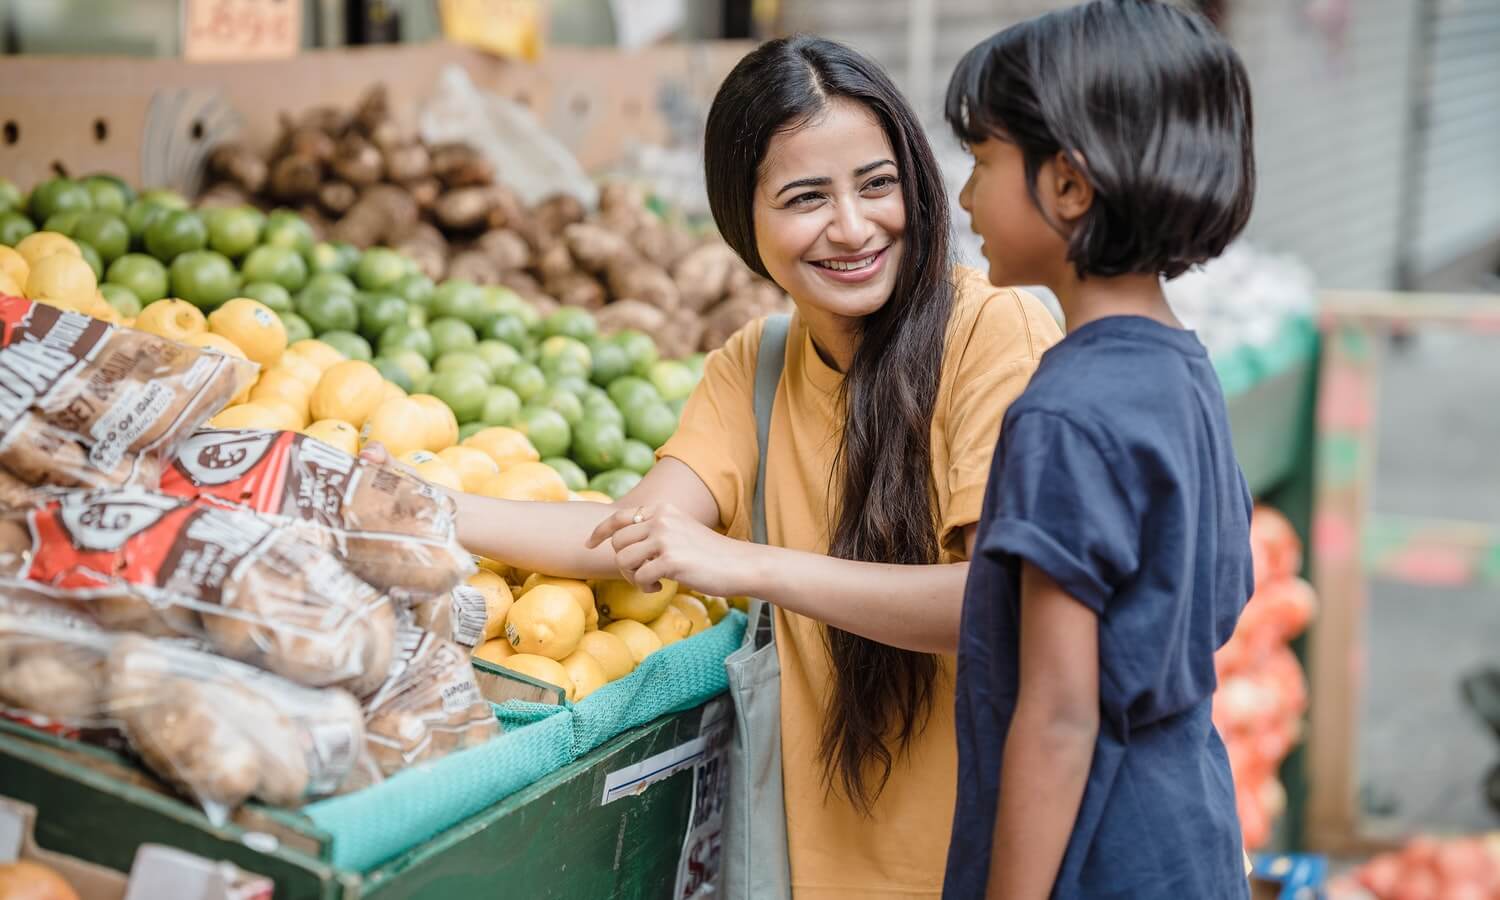 A woman and young girl shop for fresh produce.